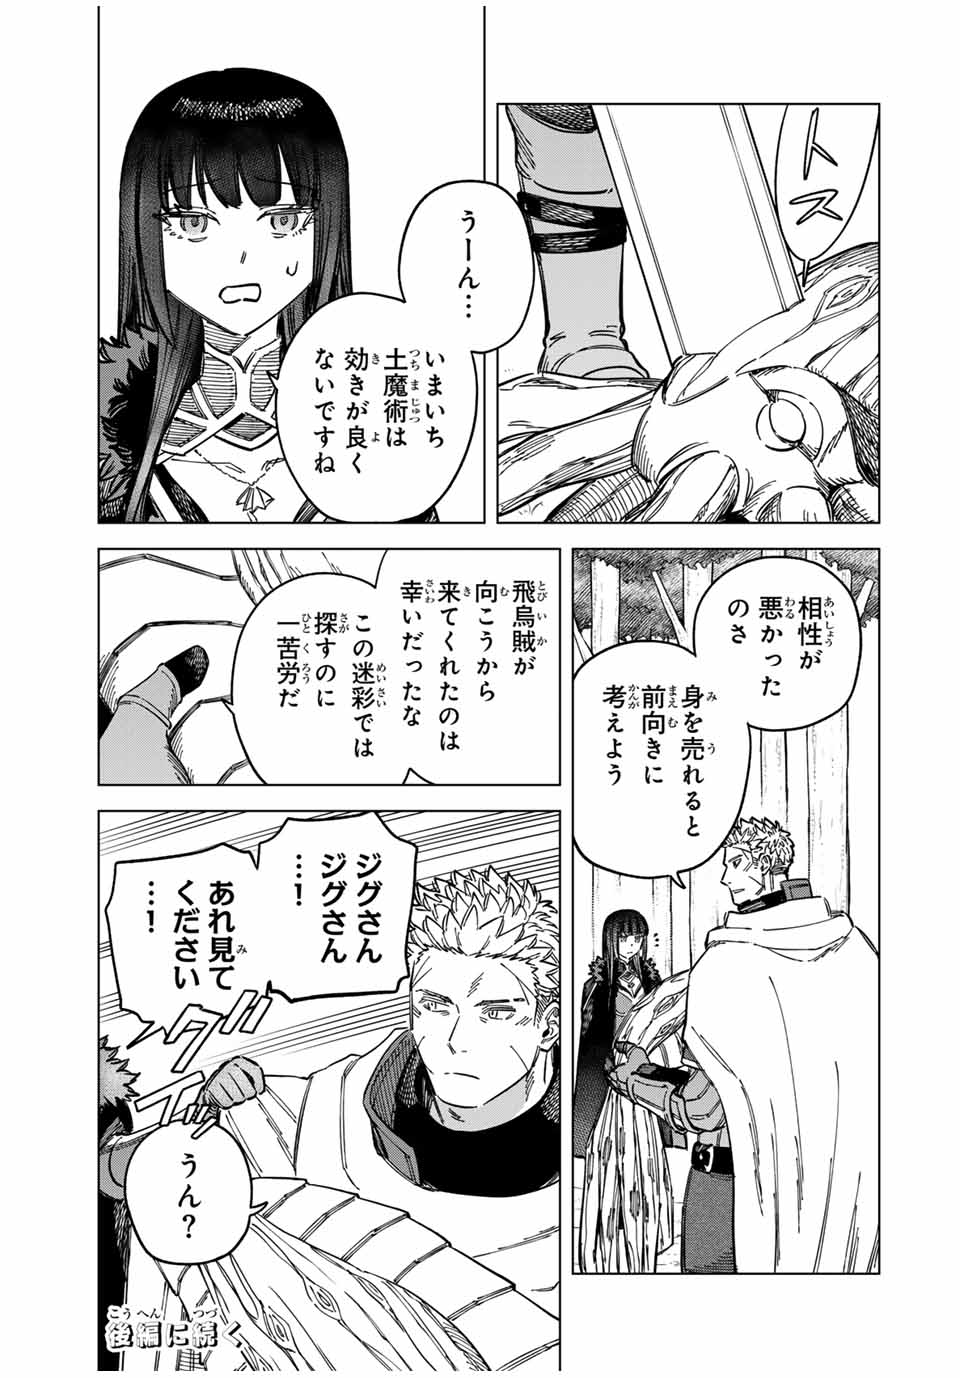 Witch and Mercenary 魔女と傭兵 第9.1話 - Page 15